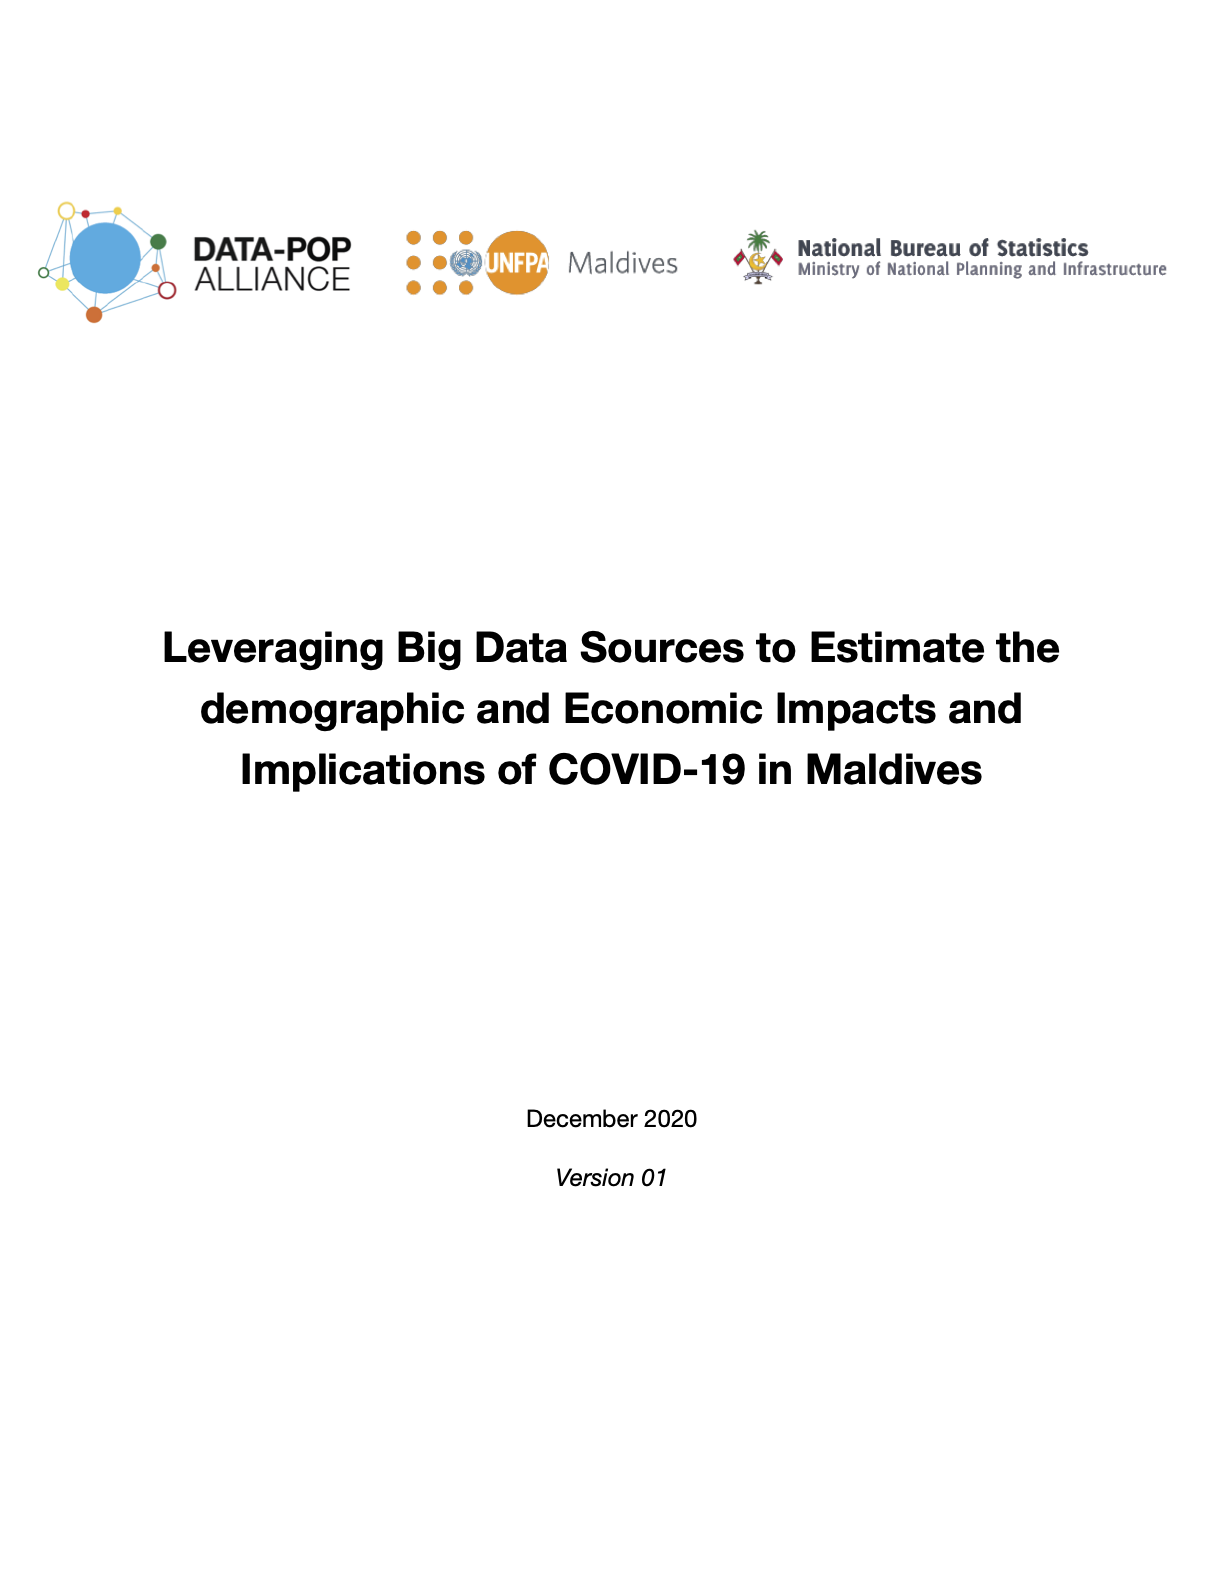 Leveraging Big Data Sources to Estimate the demographic and Economic Impacts and Implications of COVID-19 in Maldives